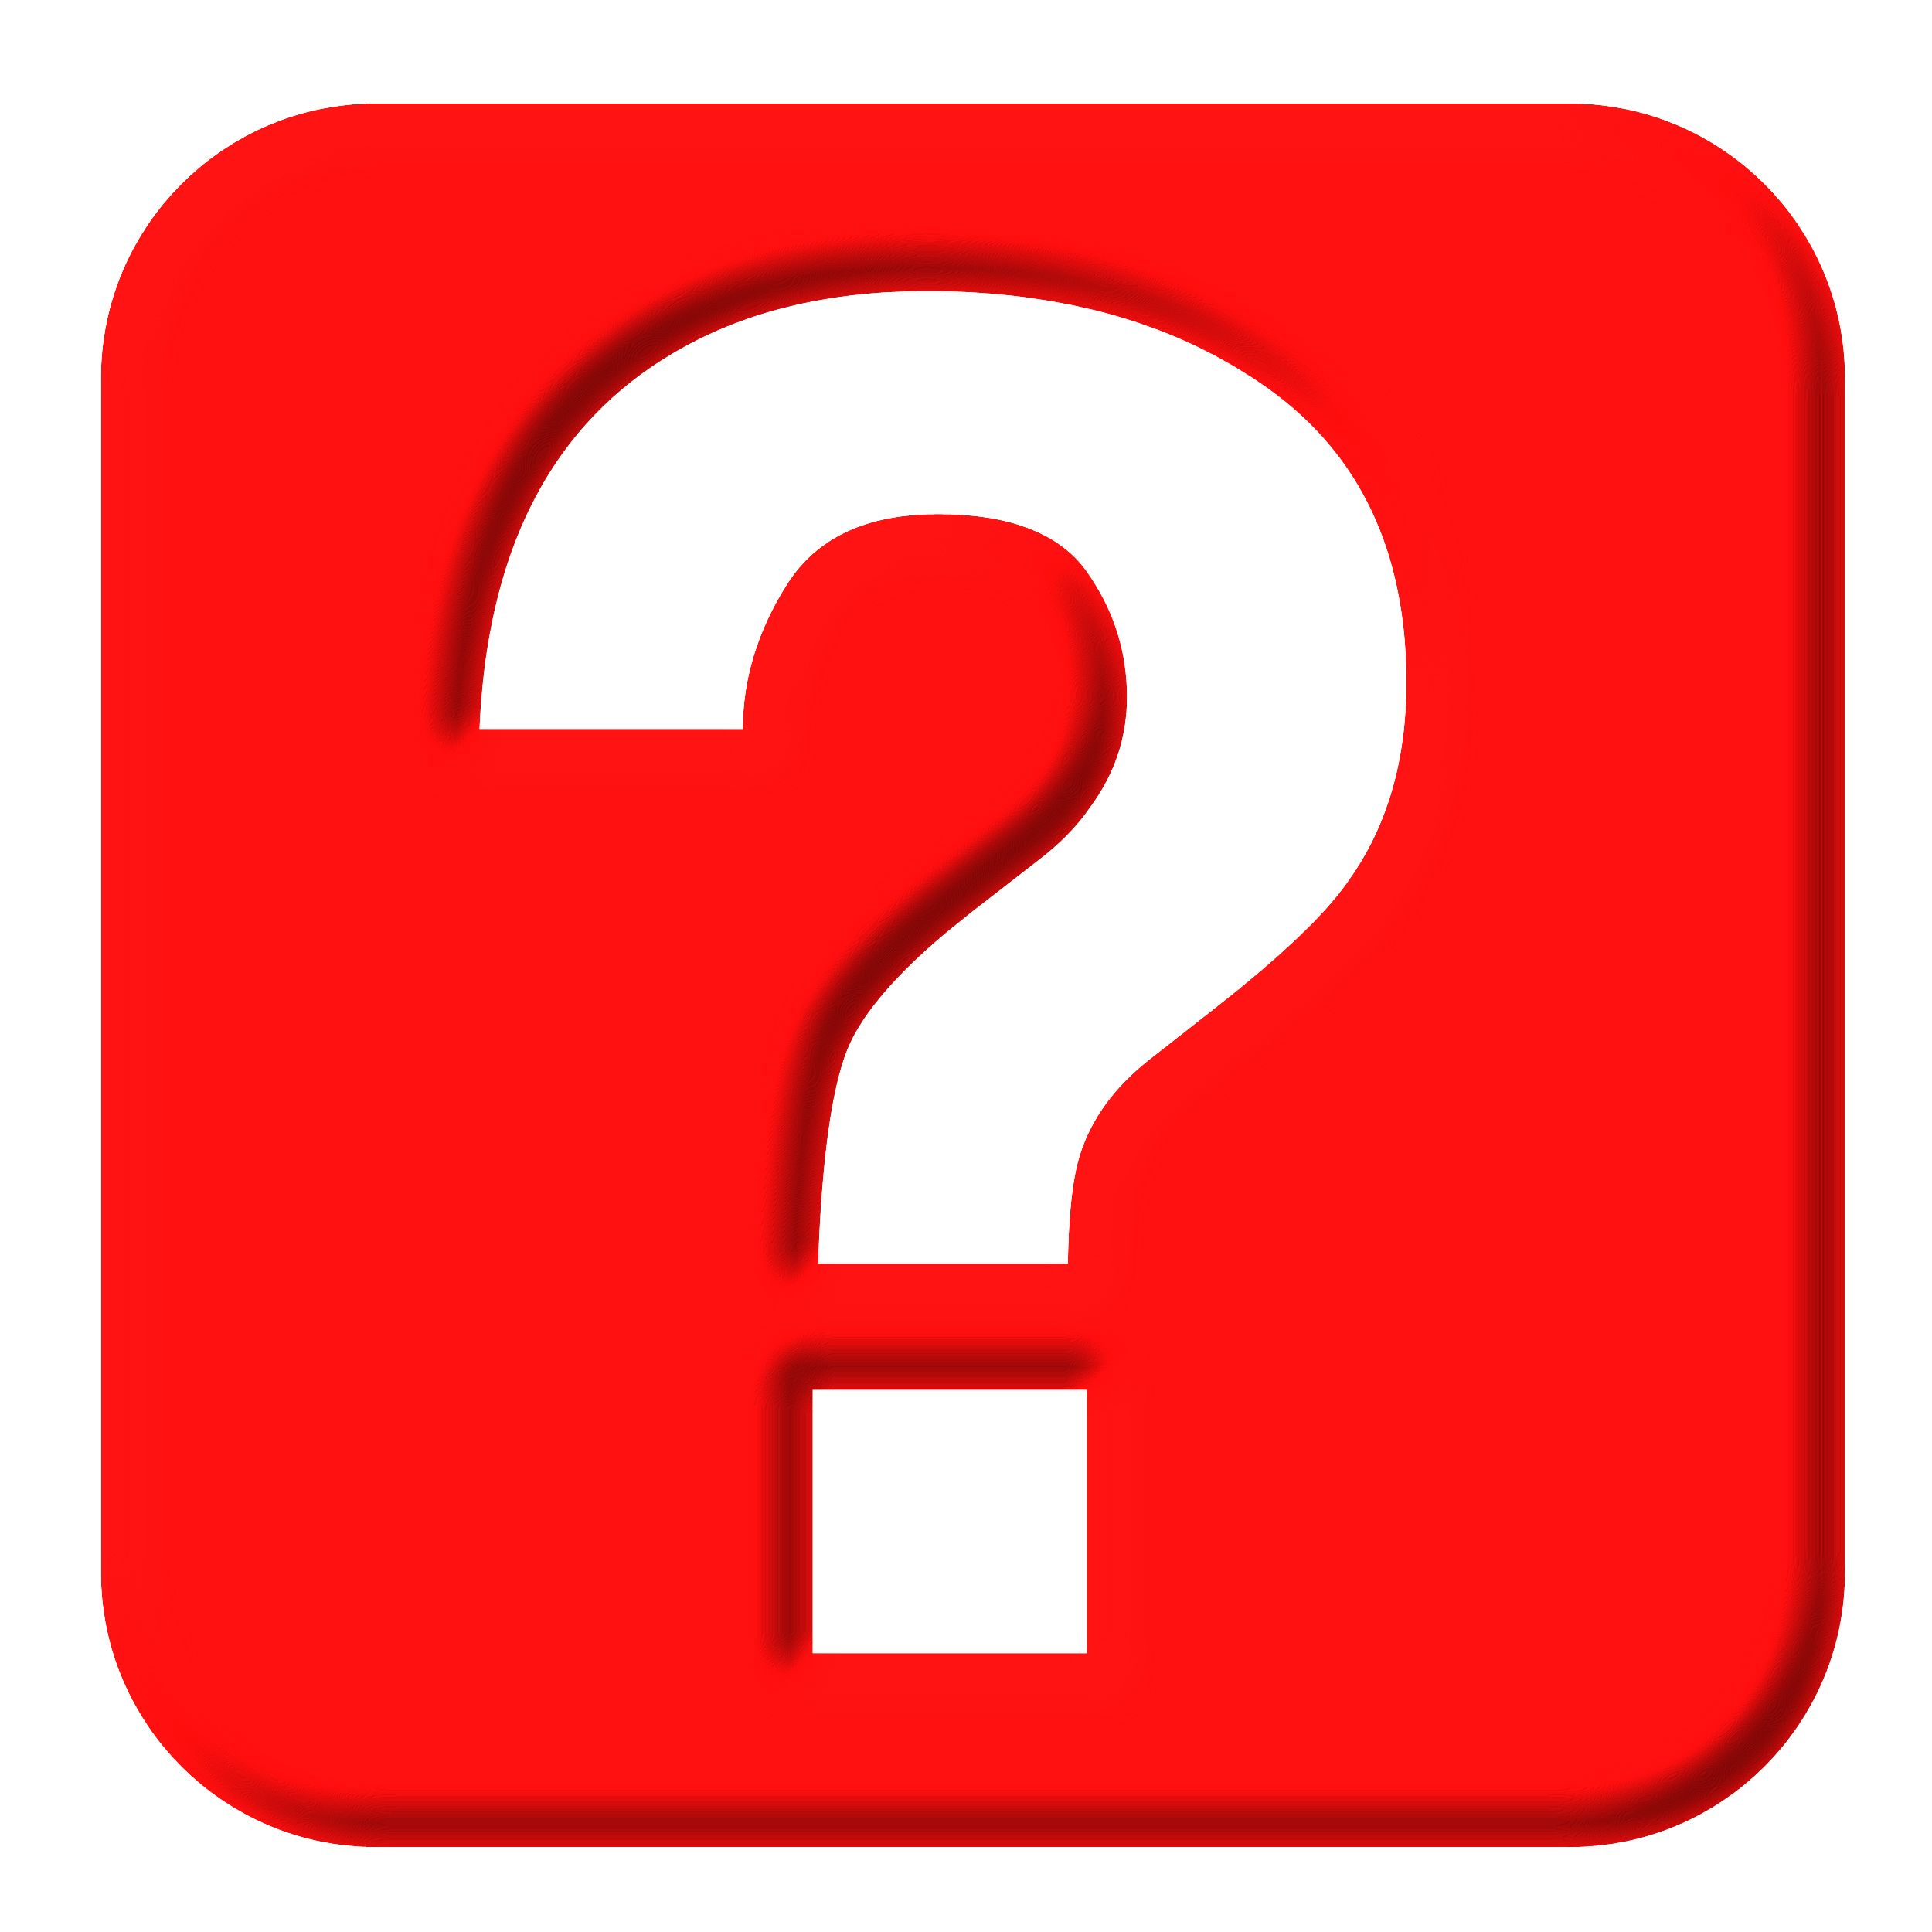 Red Question Marks - ClipArt Best